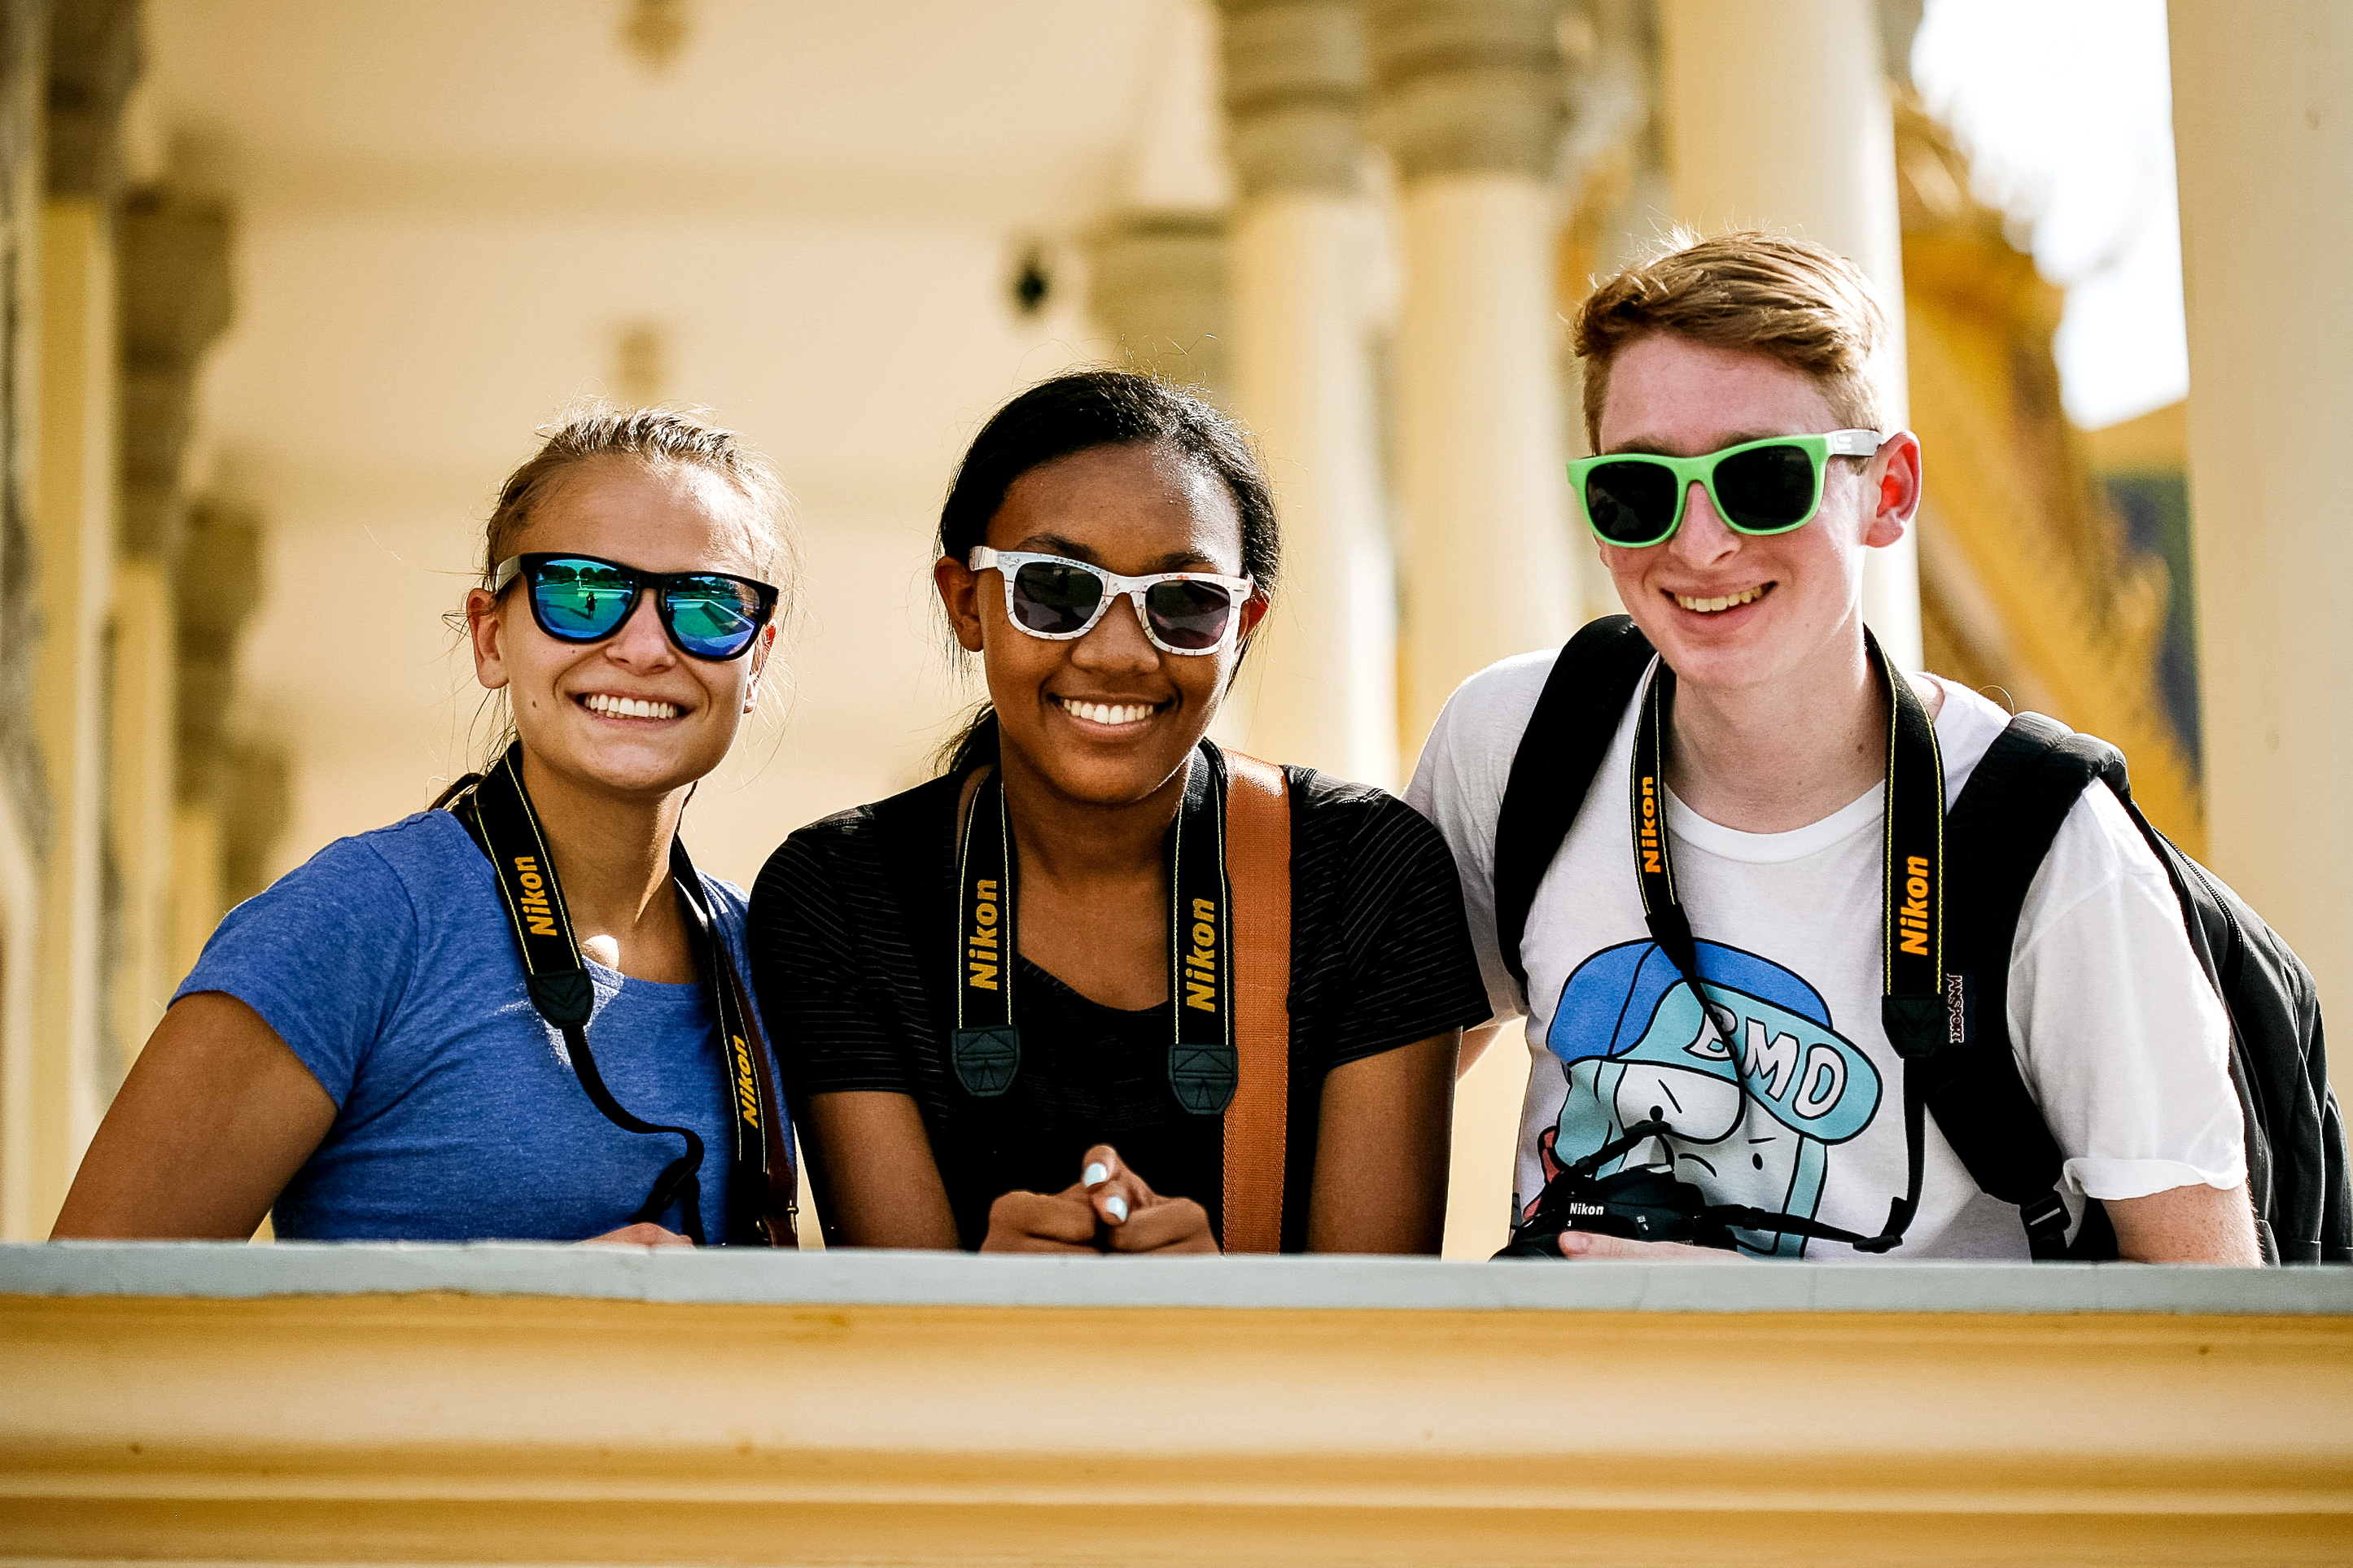 Travel Programs for Young Adults